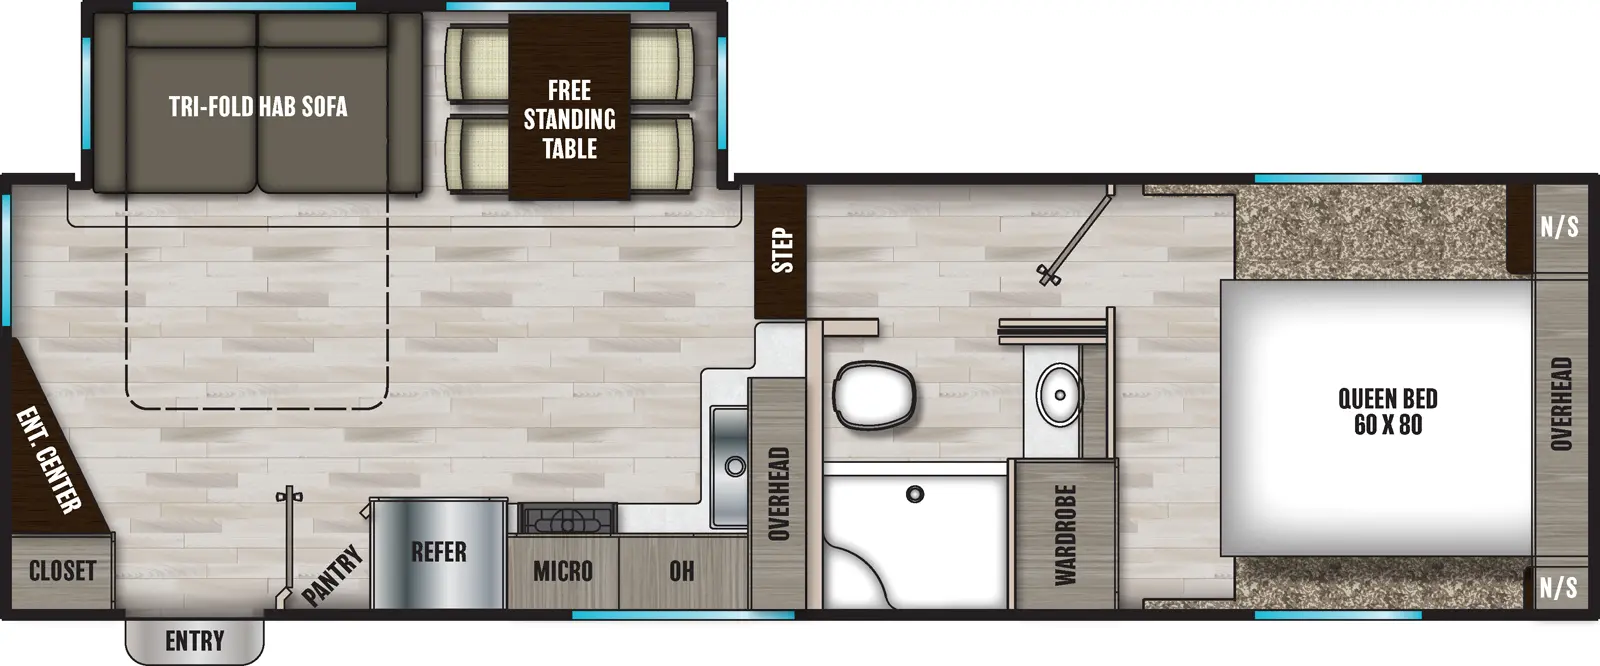 The 25RE has one slide out and one entry. Interior layout front to back: front bedroom with foot facing queen bed, overhead cabinet, night stands on each side, and wardrobe on the door side; door side full bathroom; step down to main living area; off-door side slide out with free-standing table and tri-fold hide-a-bed sofa; kitchen counter along inner wall to door side with overhead cabinets microwave, refrigerator, and angled pantry; angled entertainment center and closet at the rear of the unit next to entry. 